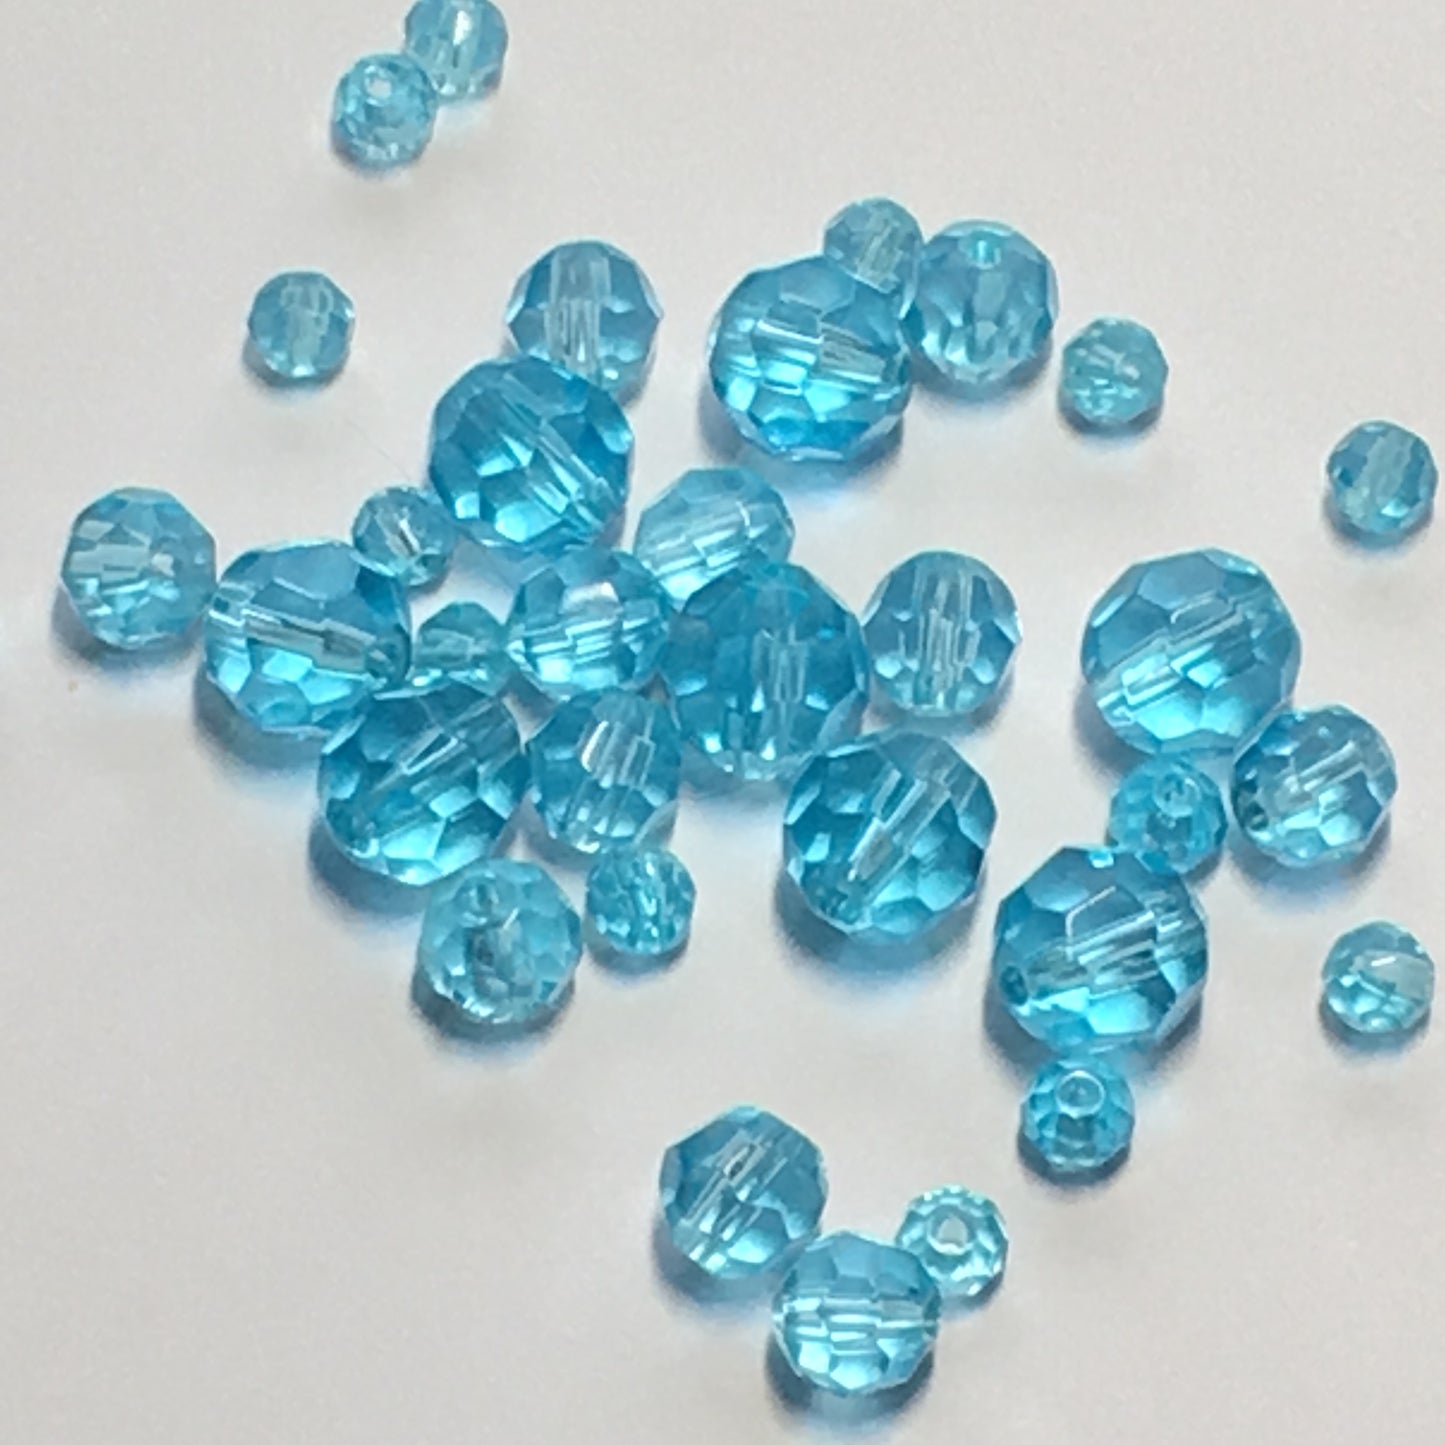 Transparent Aqua Blue Glass Faceted Round Beads for Bracelet, 4-8 mm, 33 Beads